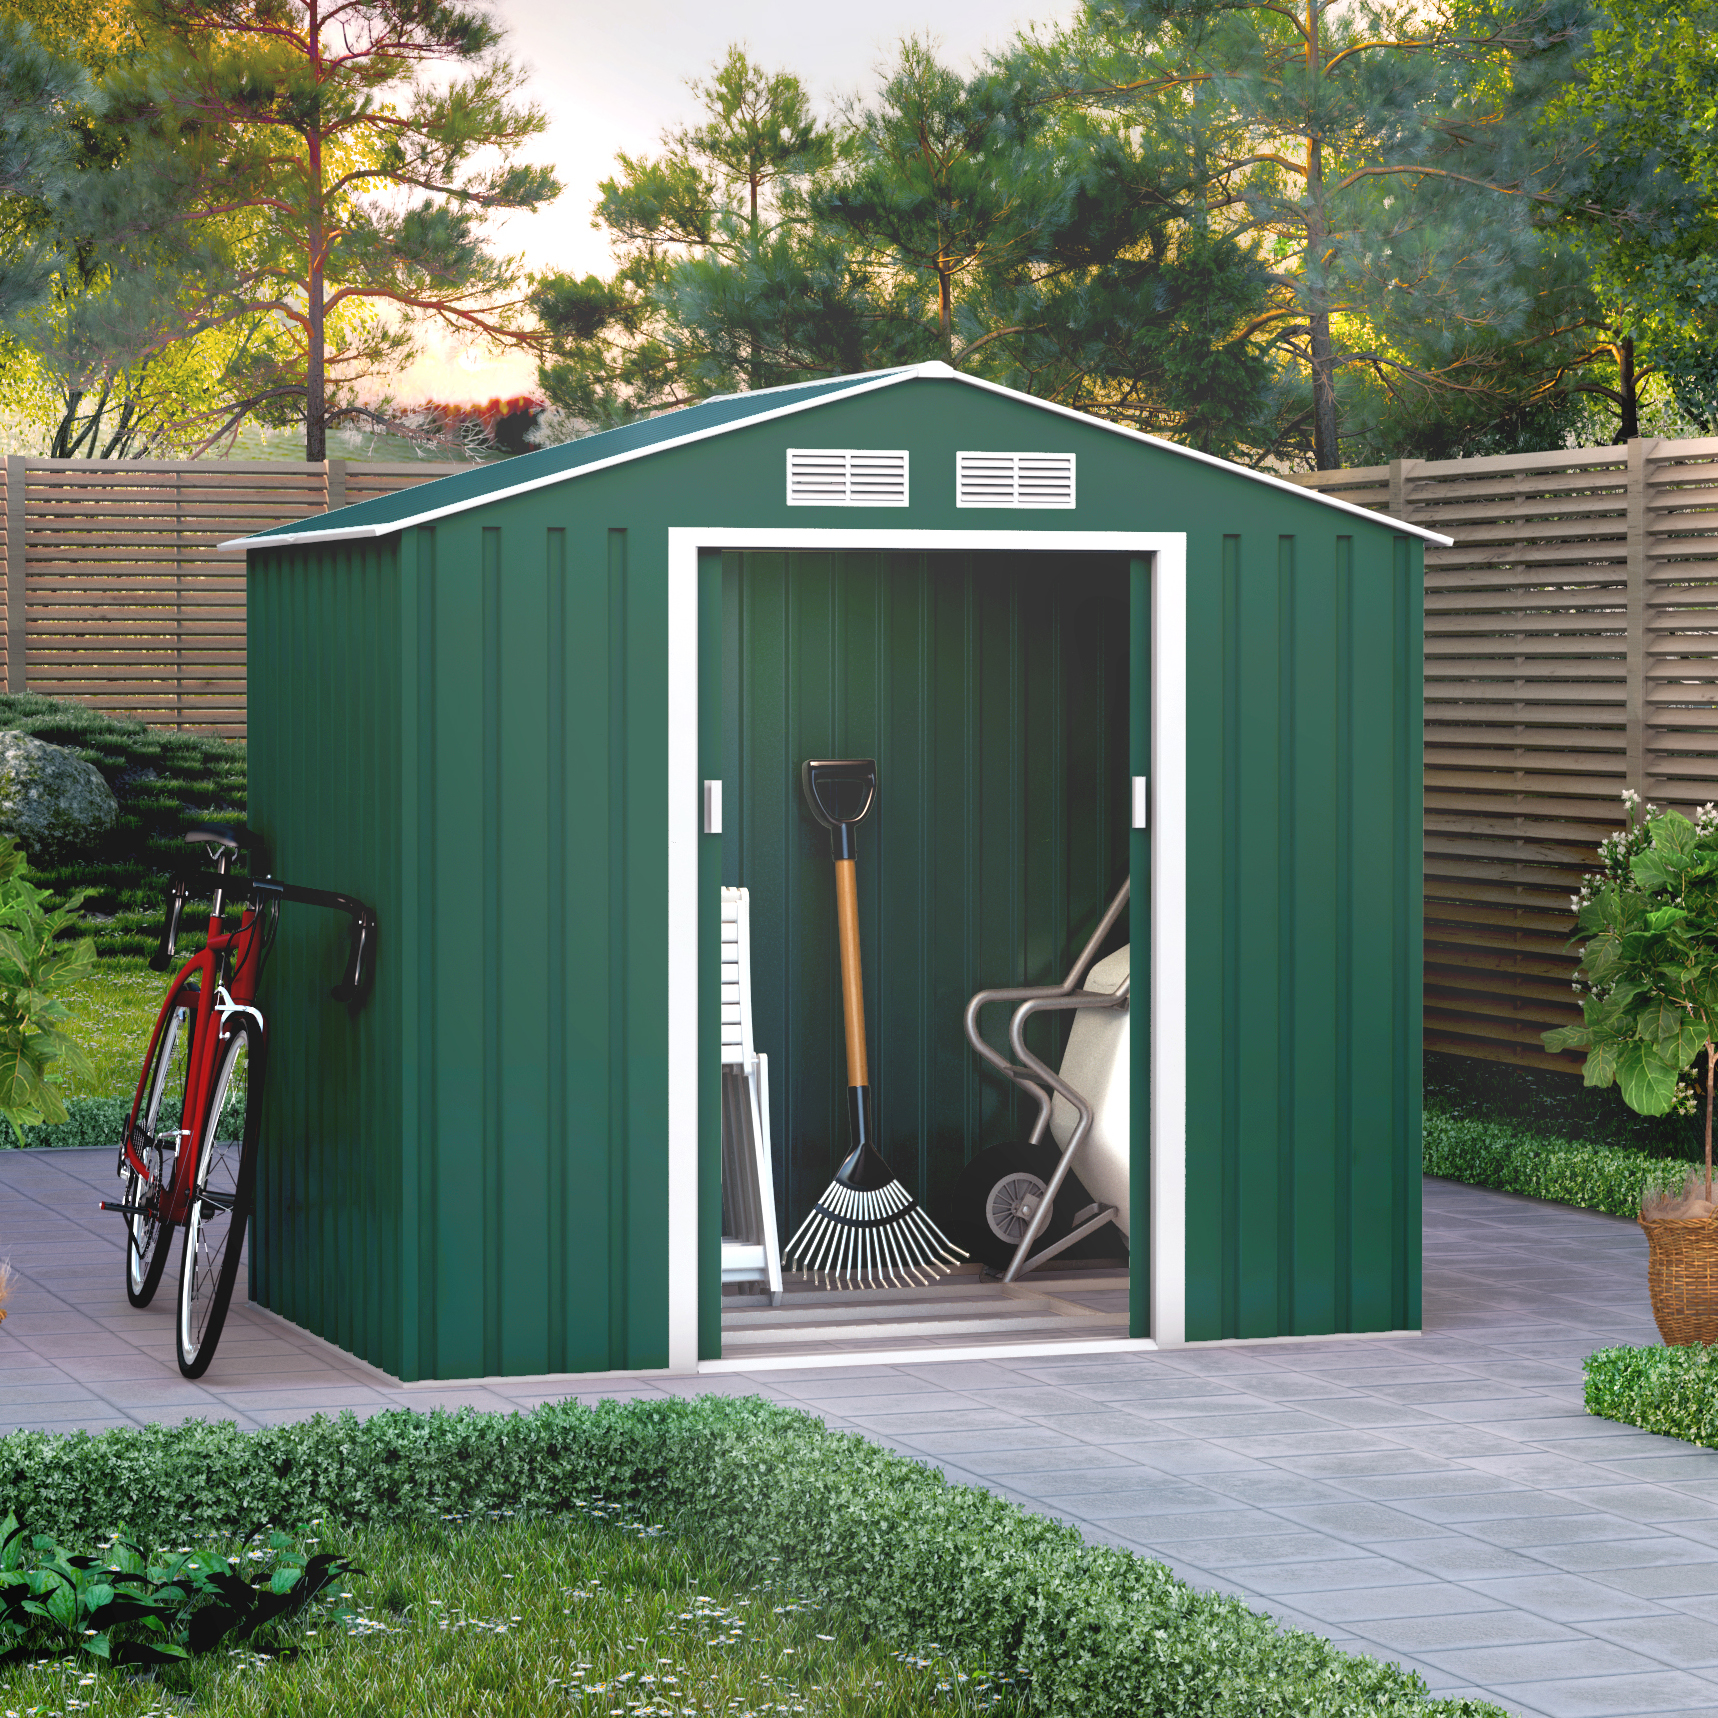 7x4 Ranger Apex Metal Shed With Foundation Kit -  Dark Green BillyOh